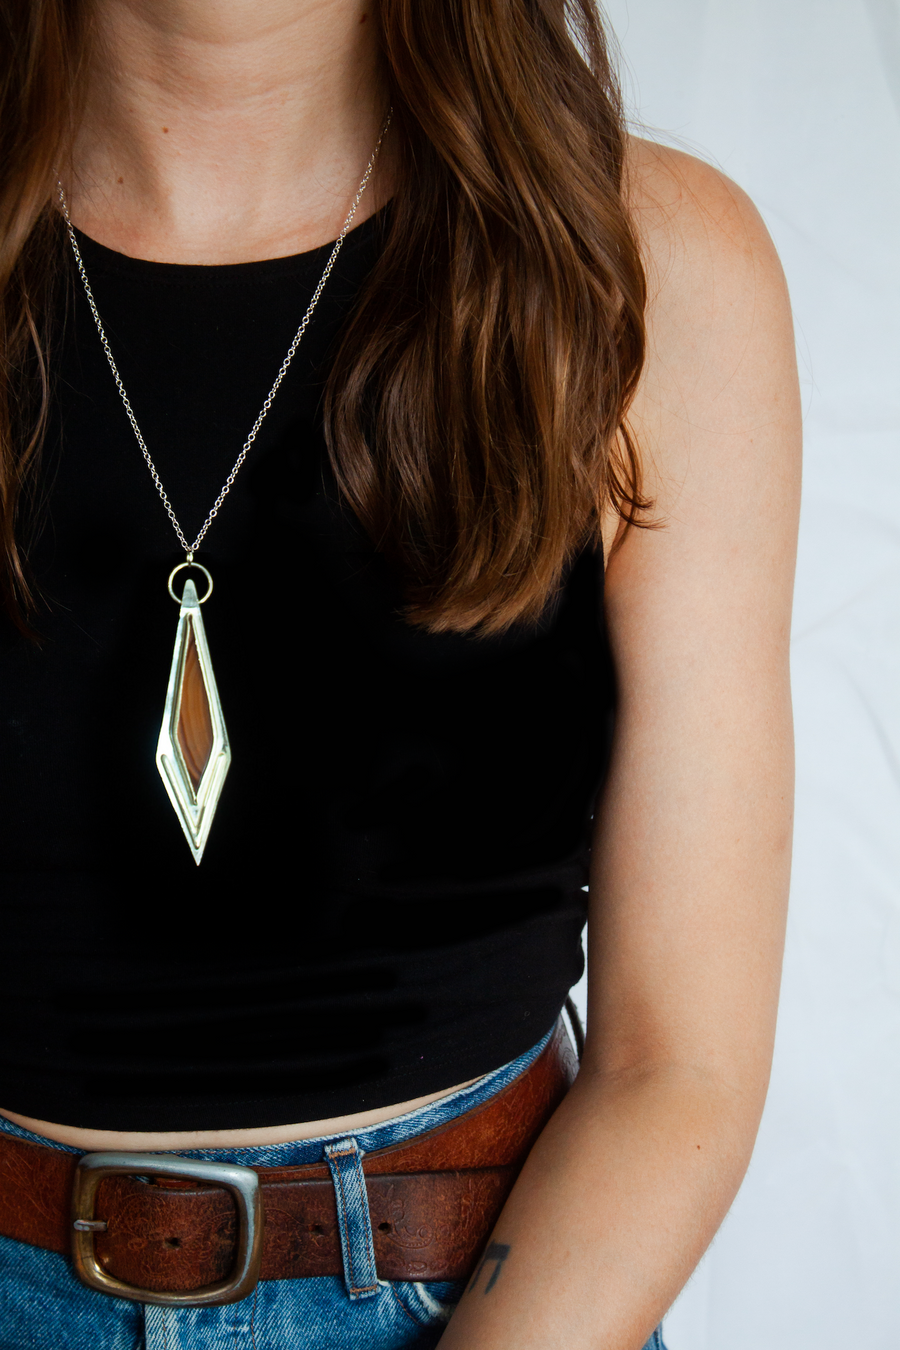 Lined Agate Necklace